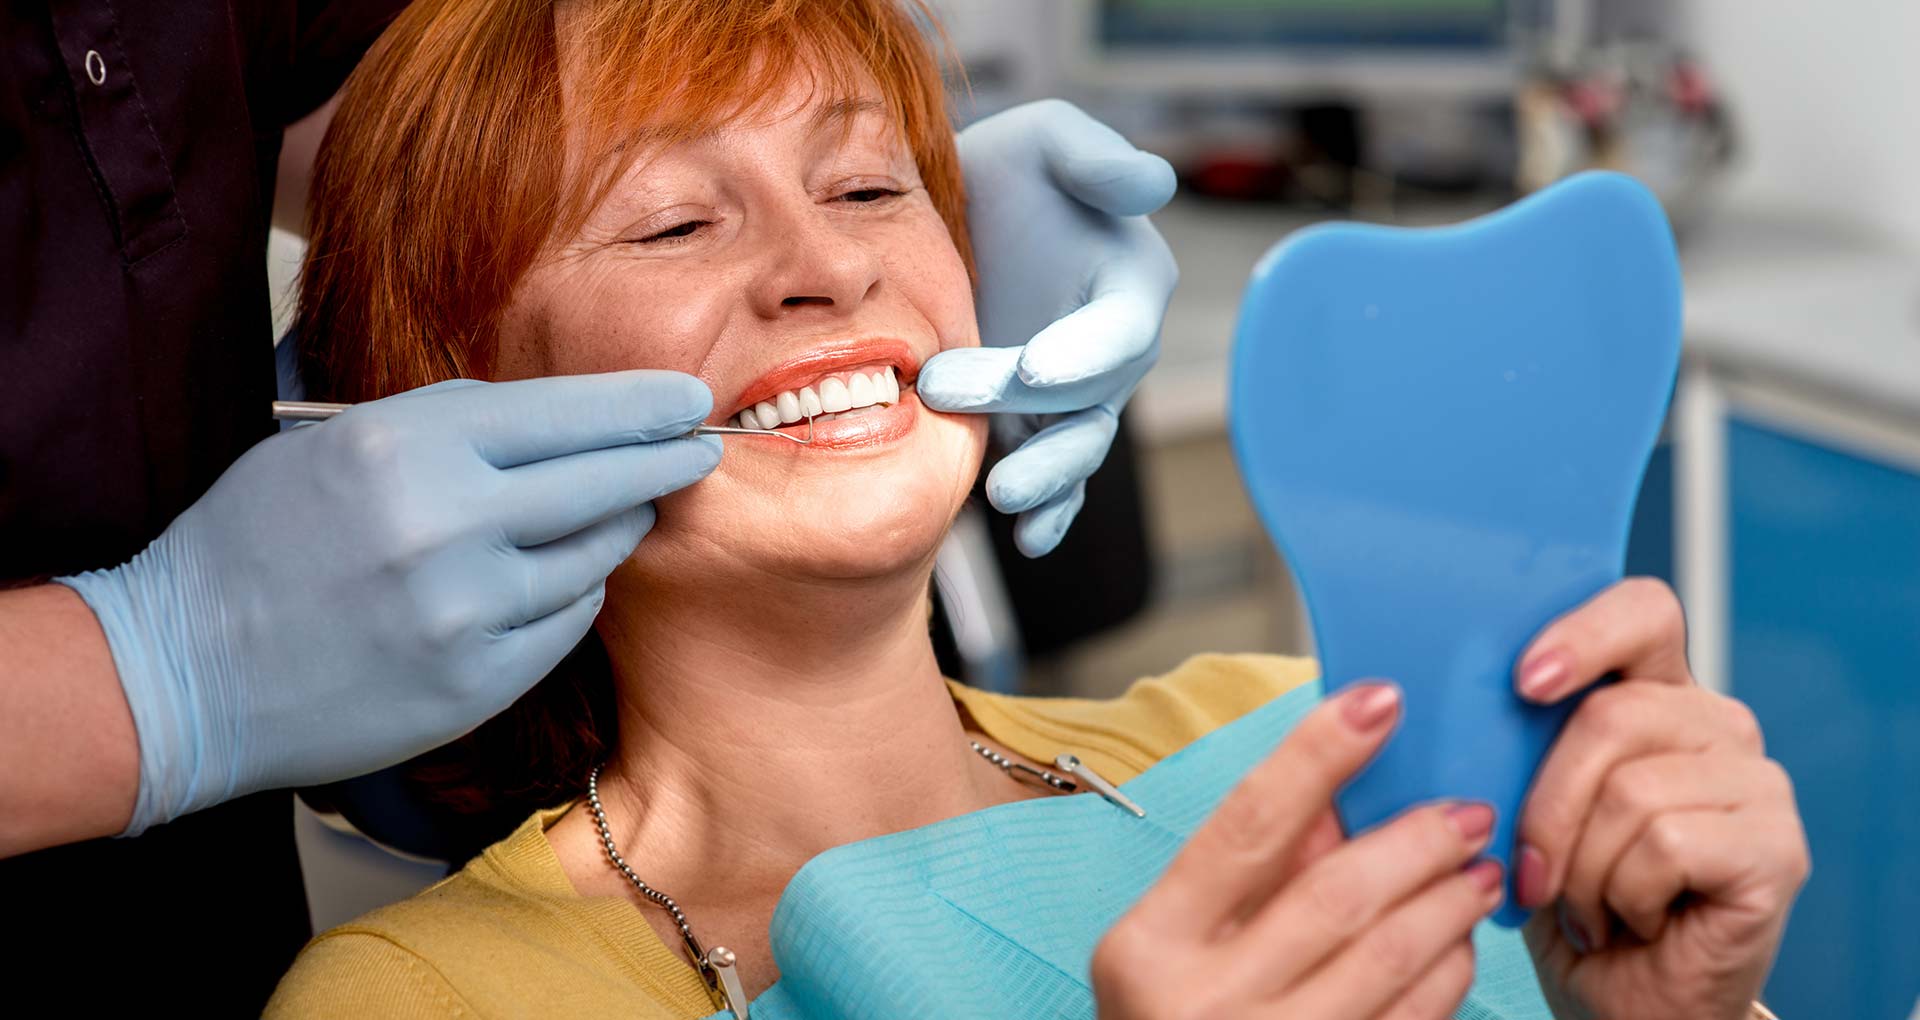 Get The Best Dental Care With Mesa Family Dentist